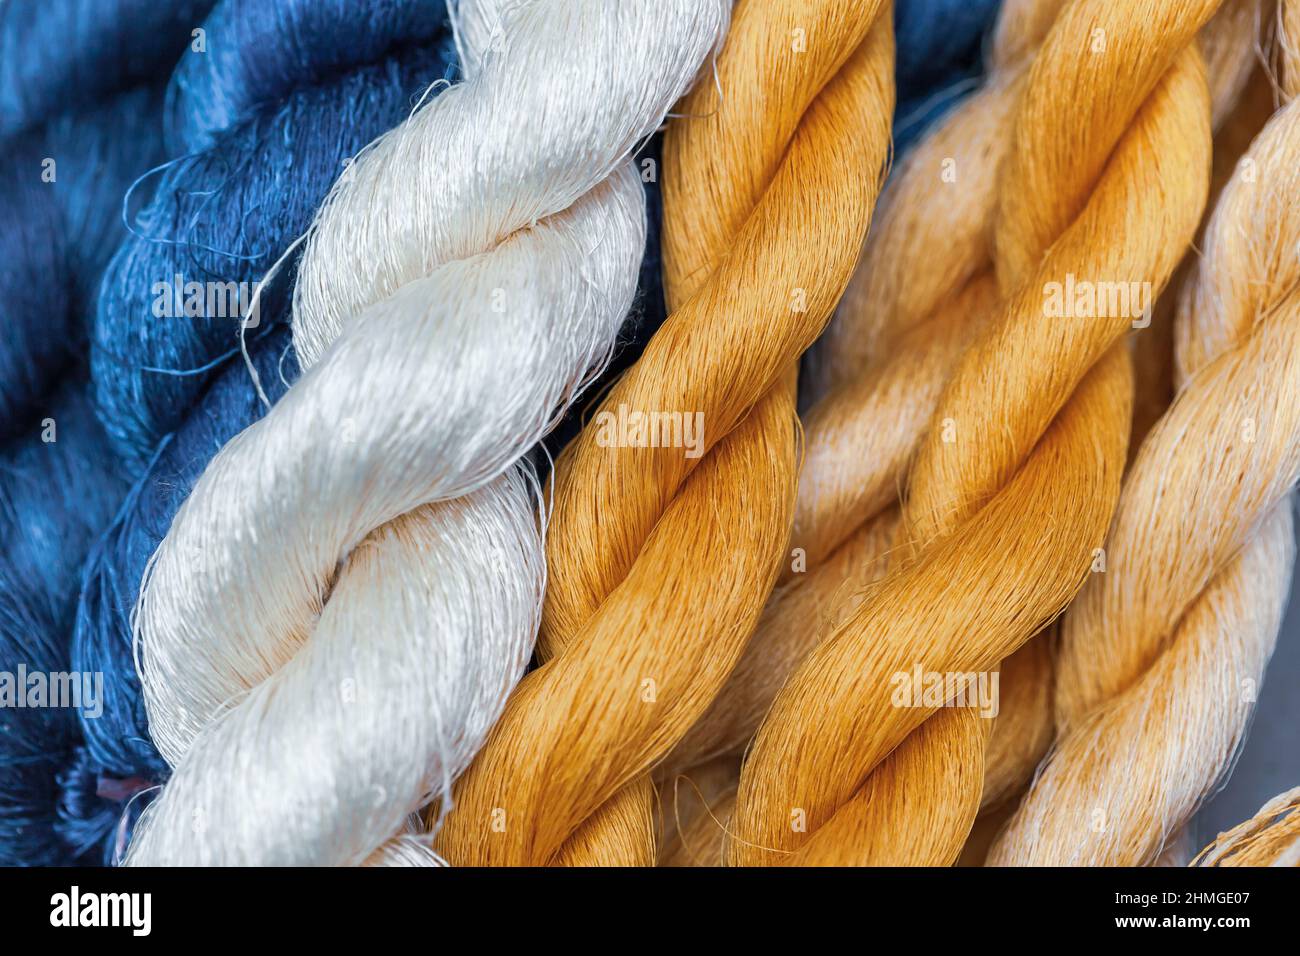 Close-up white, golden, and blue fiber of silk extracted from silk cocoons of the larvae of the mulberry silkworm. Mulberry silk fiber. Top view. Stock Photo